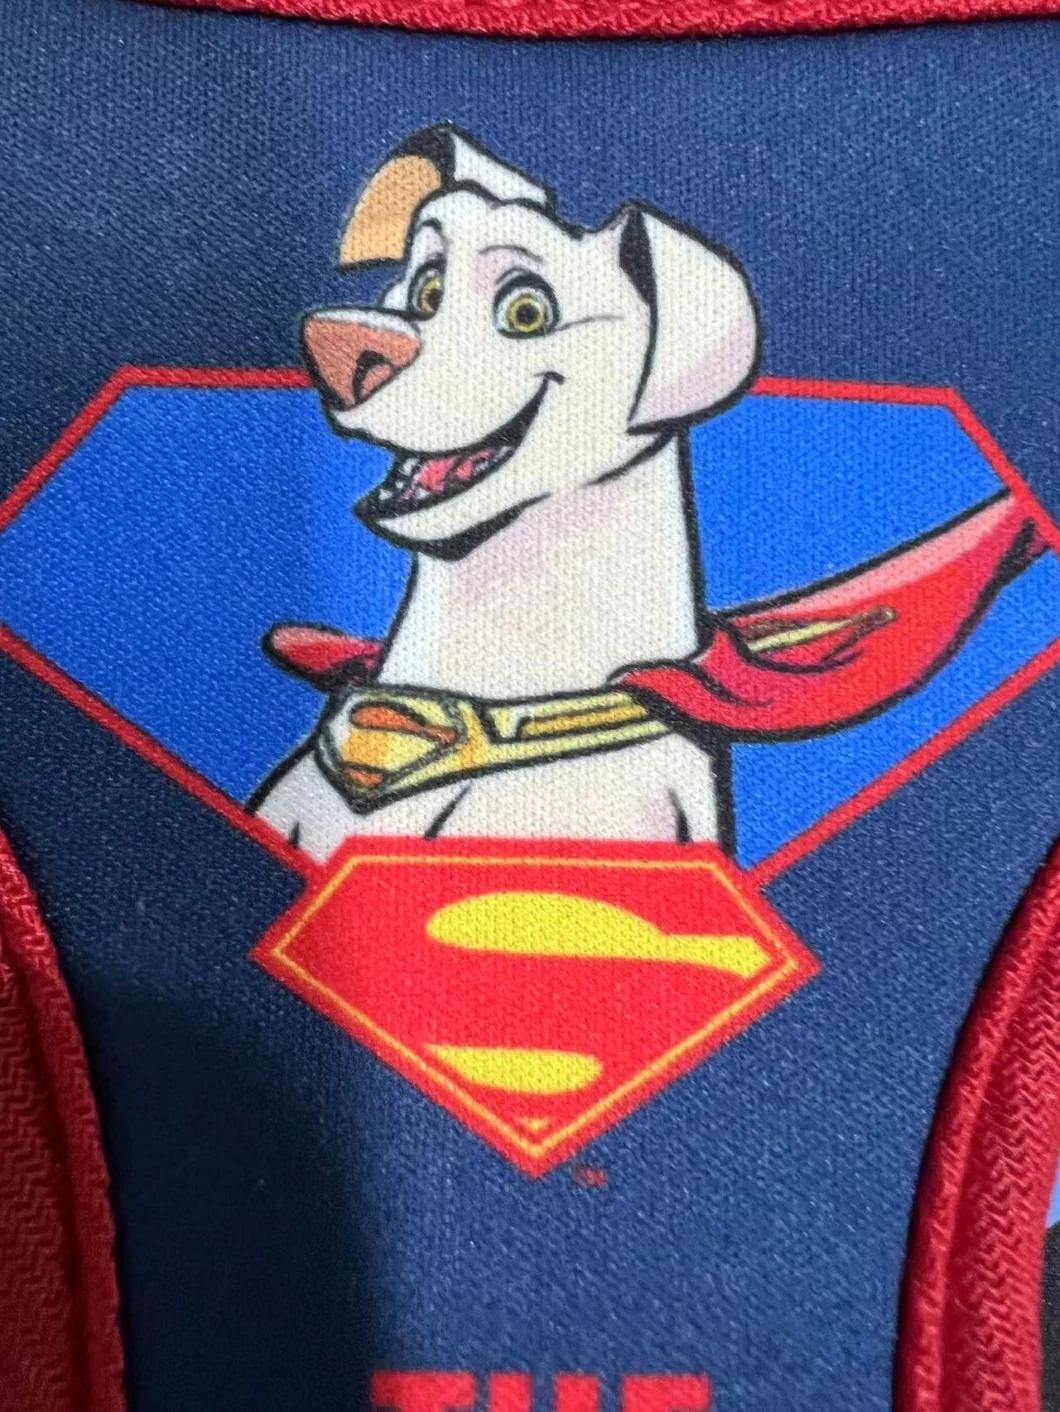 "The Super Dog" Dog Harness for Fan Pets, Pet Harness, Wholesale Dog Harness